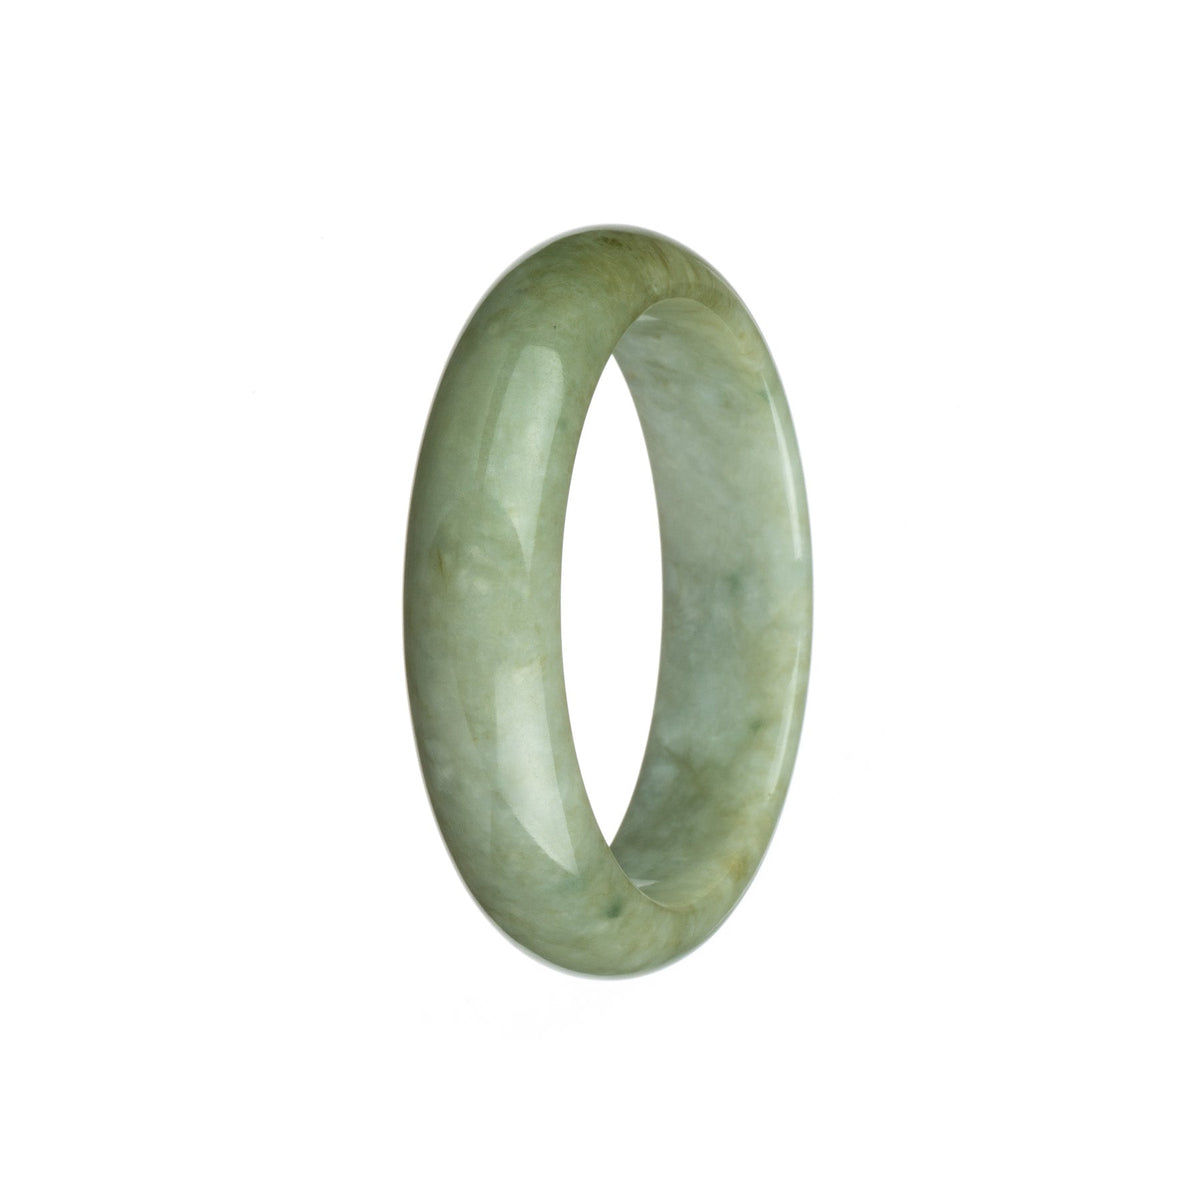 A white and brown jade bangle bracelet, certified as Type A, featuring a 55mm half moon design. Made by MAYS™.